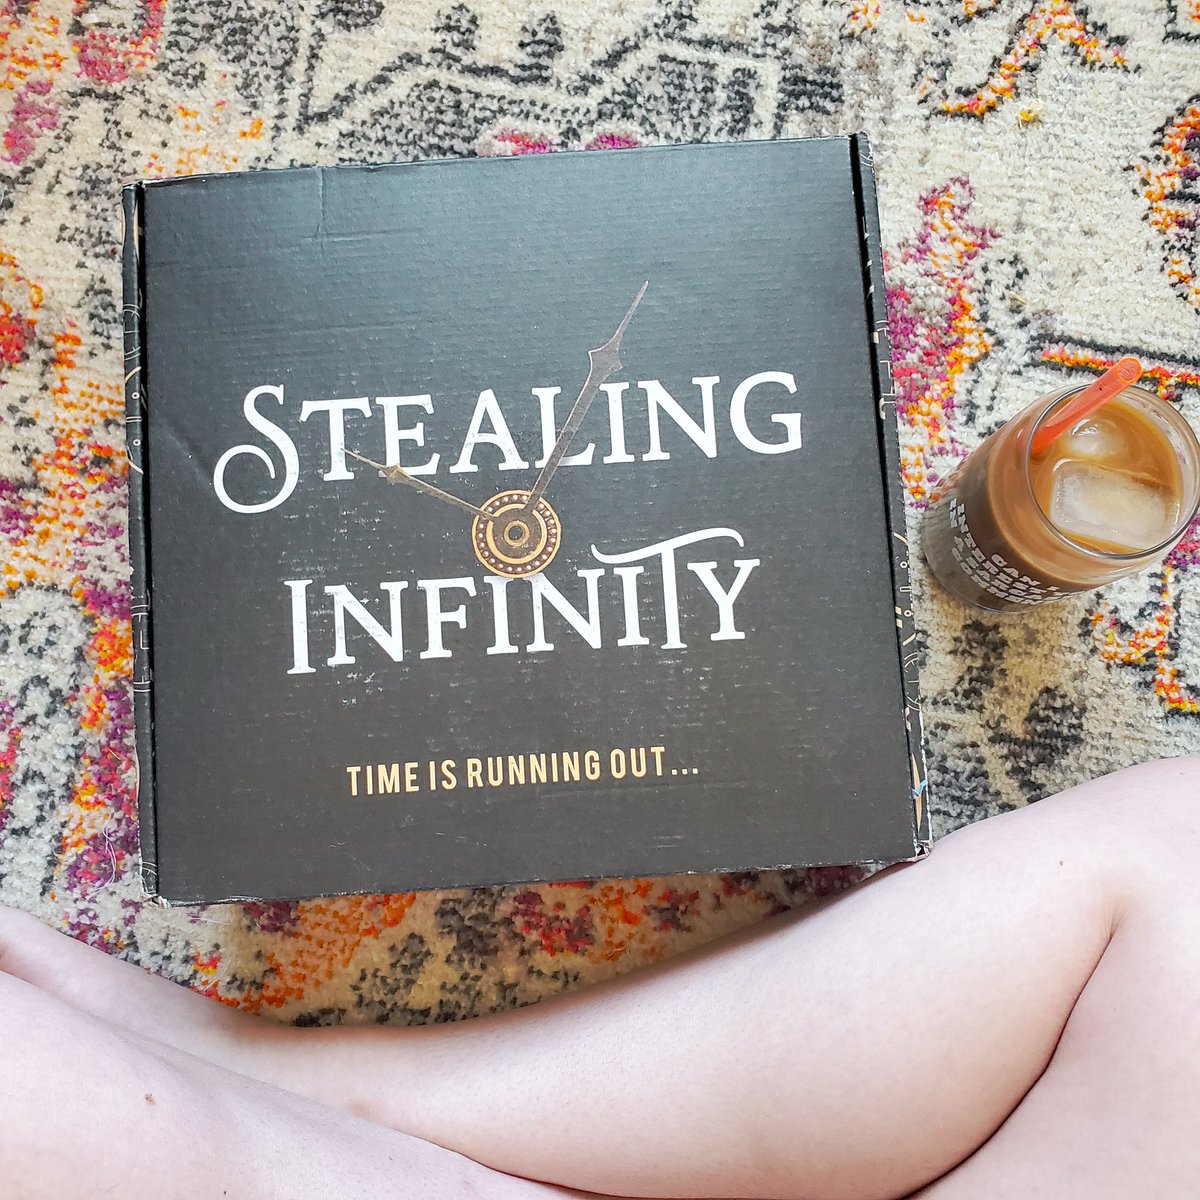 Unboxing my first ever PR box, for Stealing Infinity (out later this month). There's some pretty cool stuff in here! Check it out #booktwt instagram.com/p/CewFxRtLZd7/…